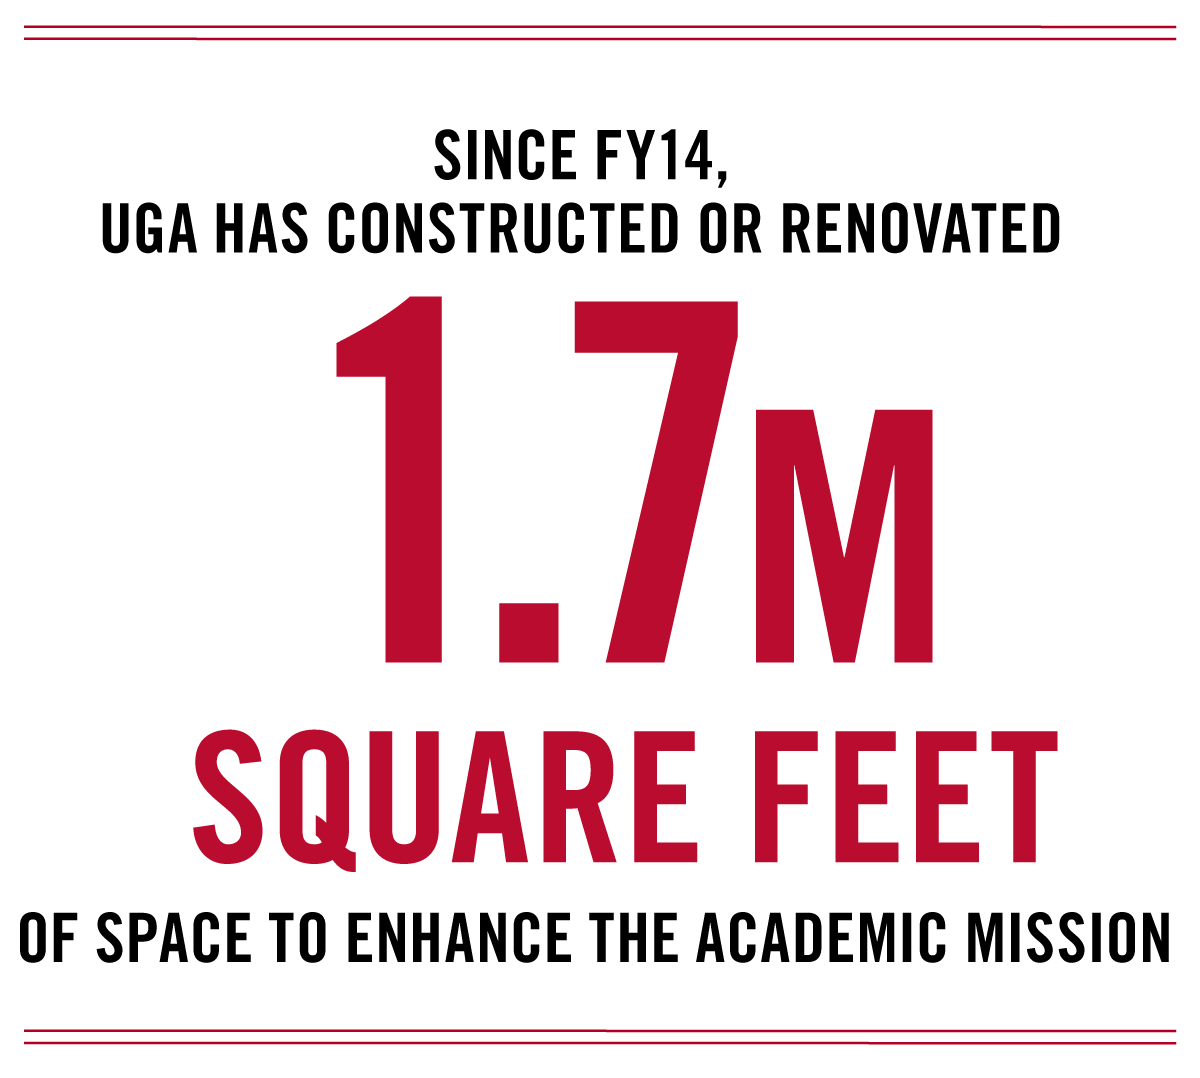 Since FY14, UGA has constructed or renovated 1.7 million square feet of space to enhance the academic mission